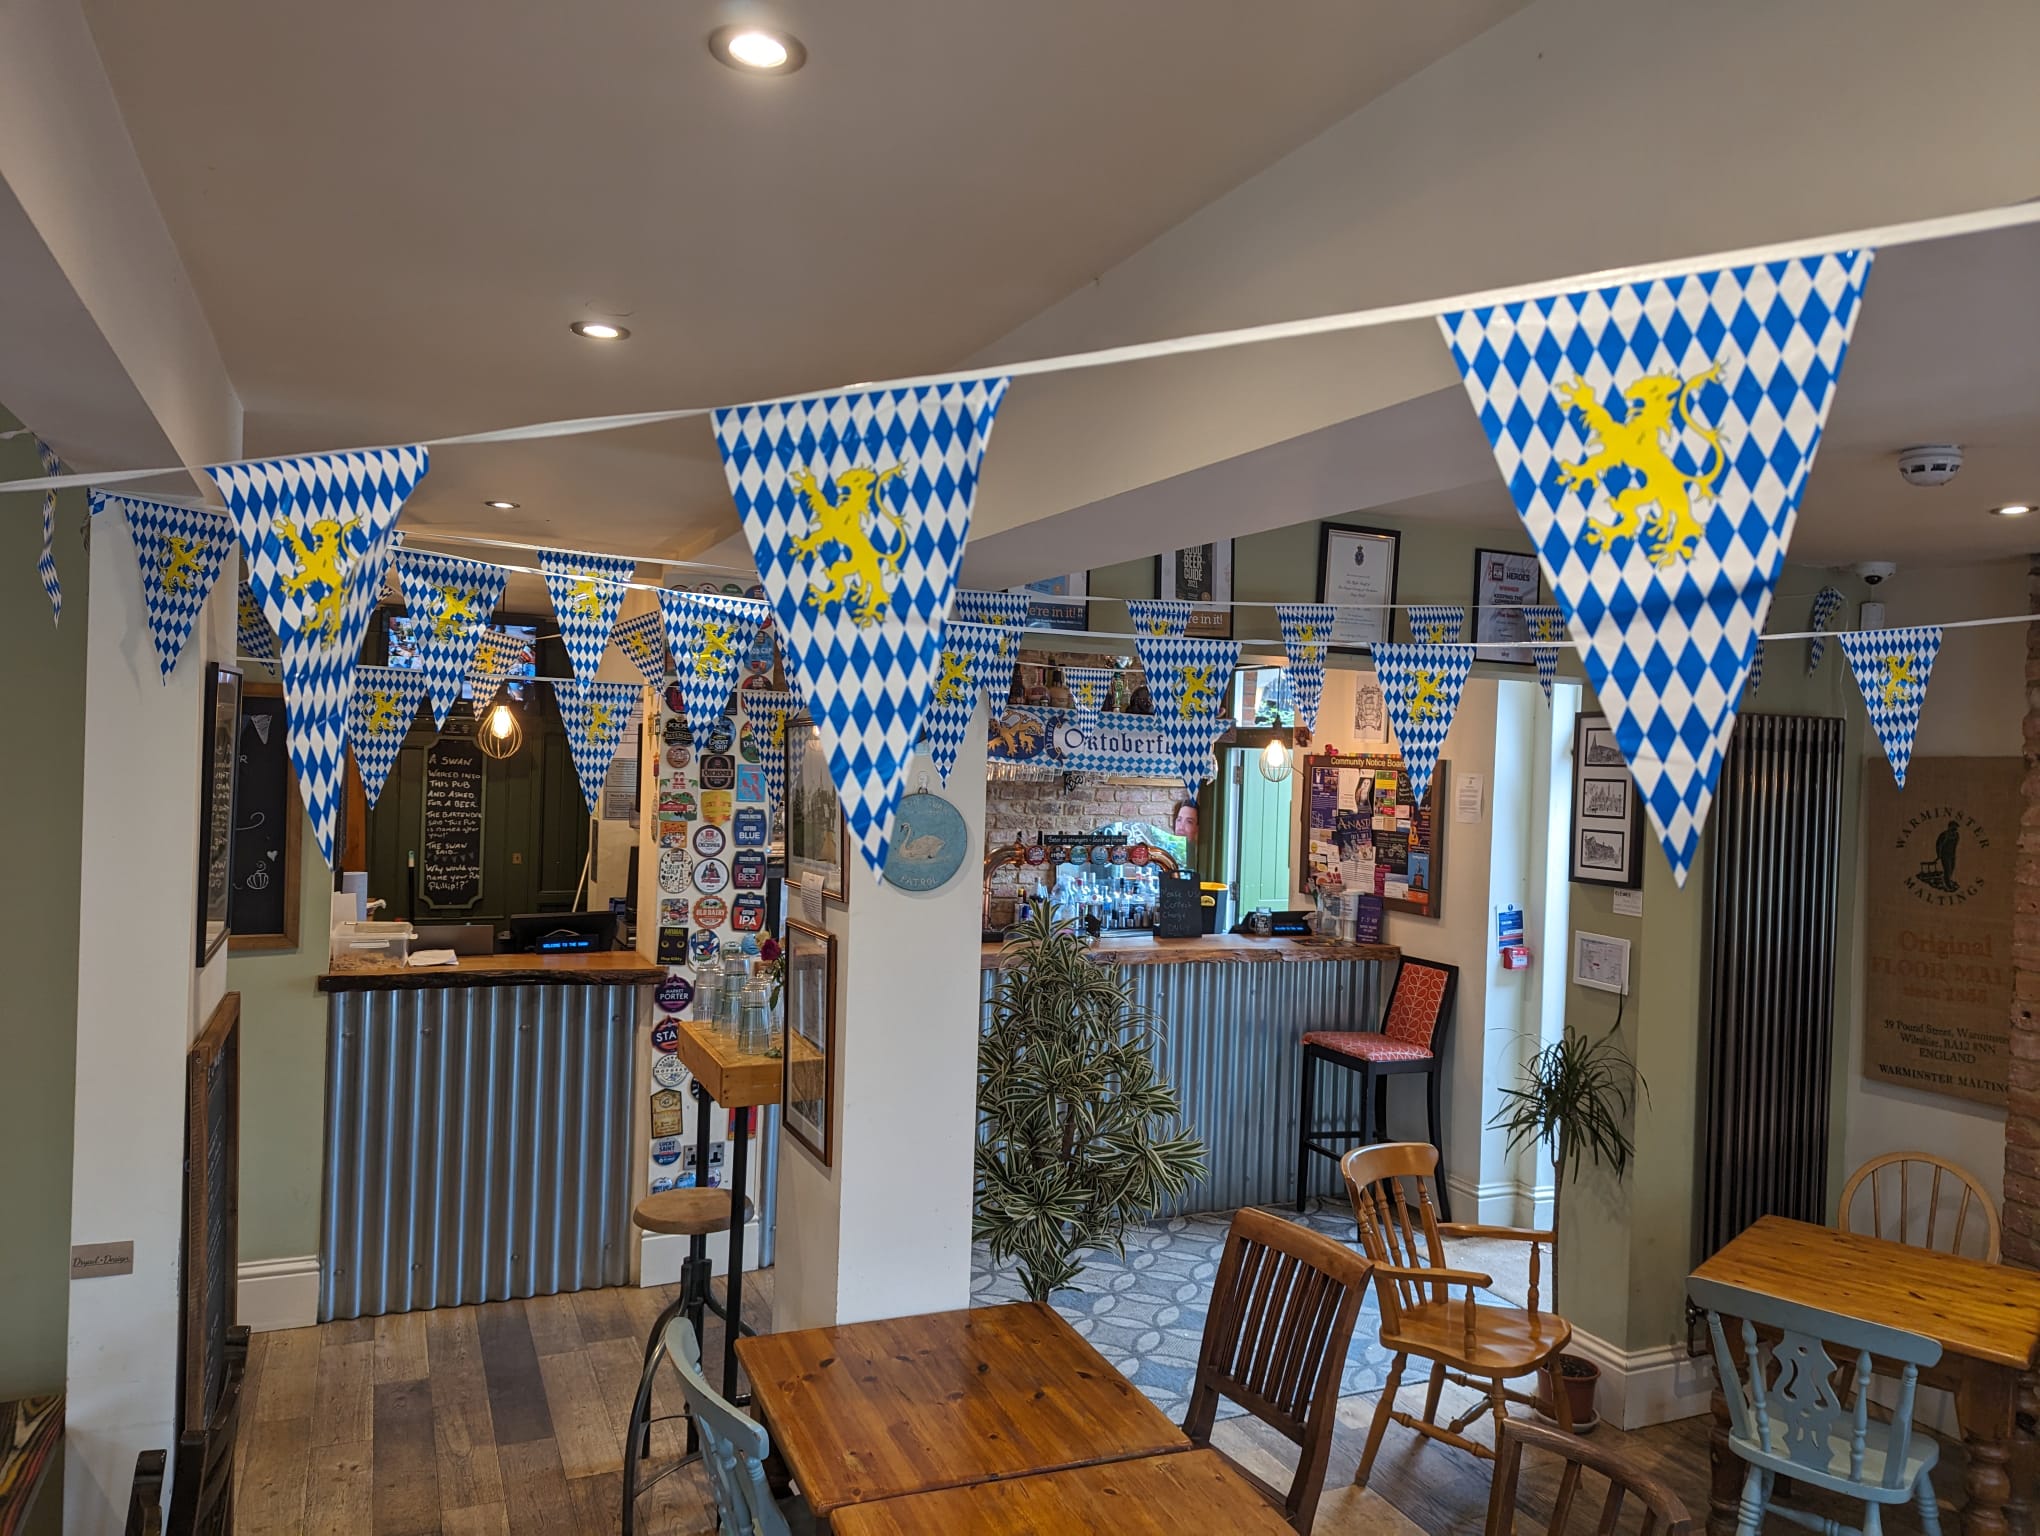 The pub was decorated with hops and Bavarian flags.